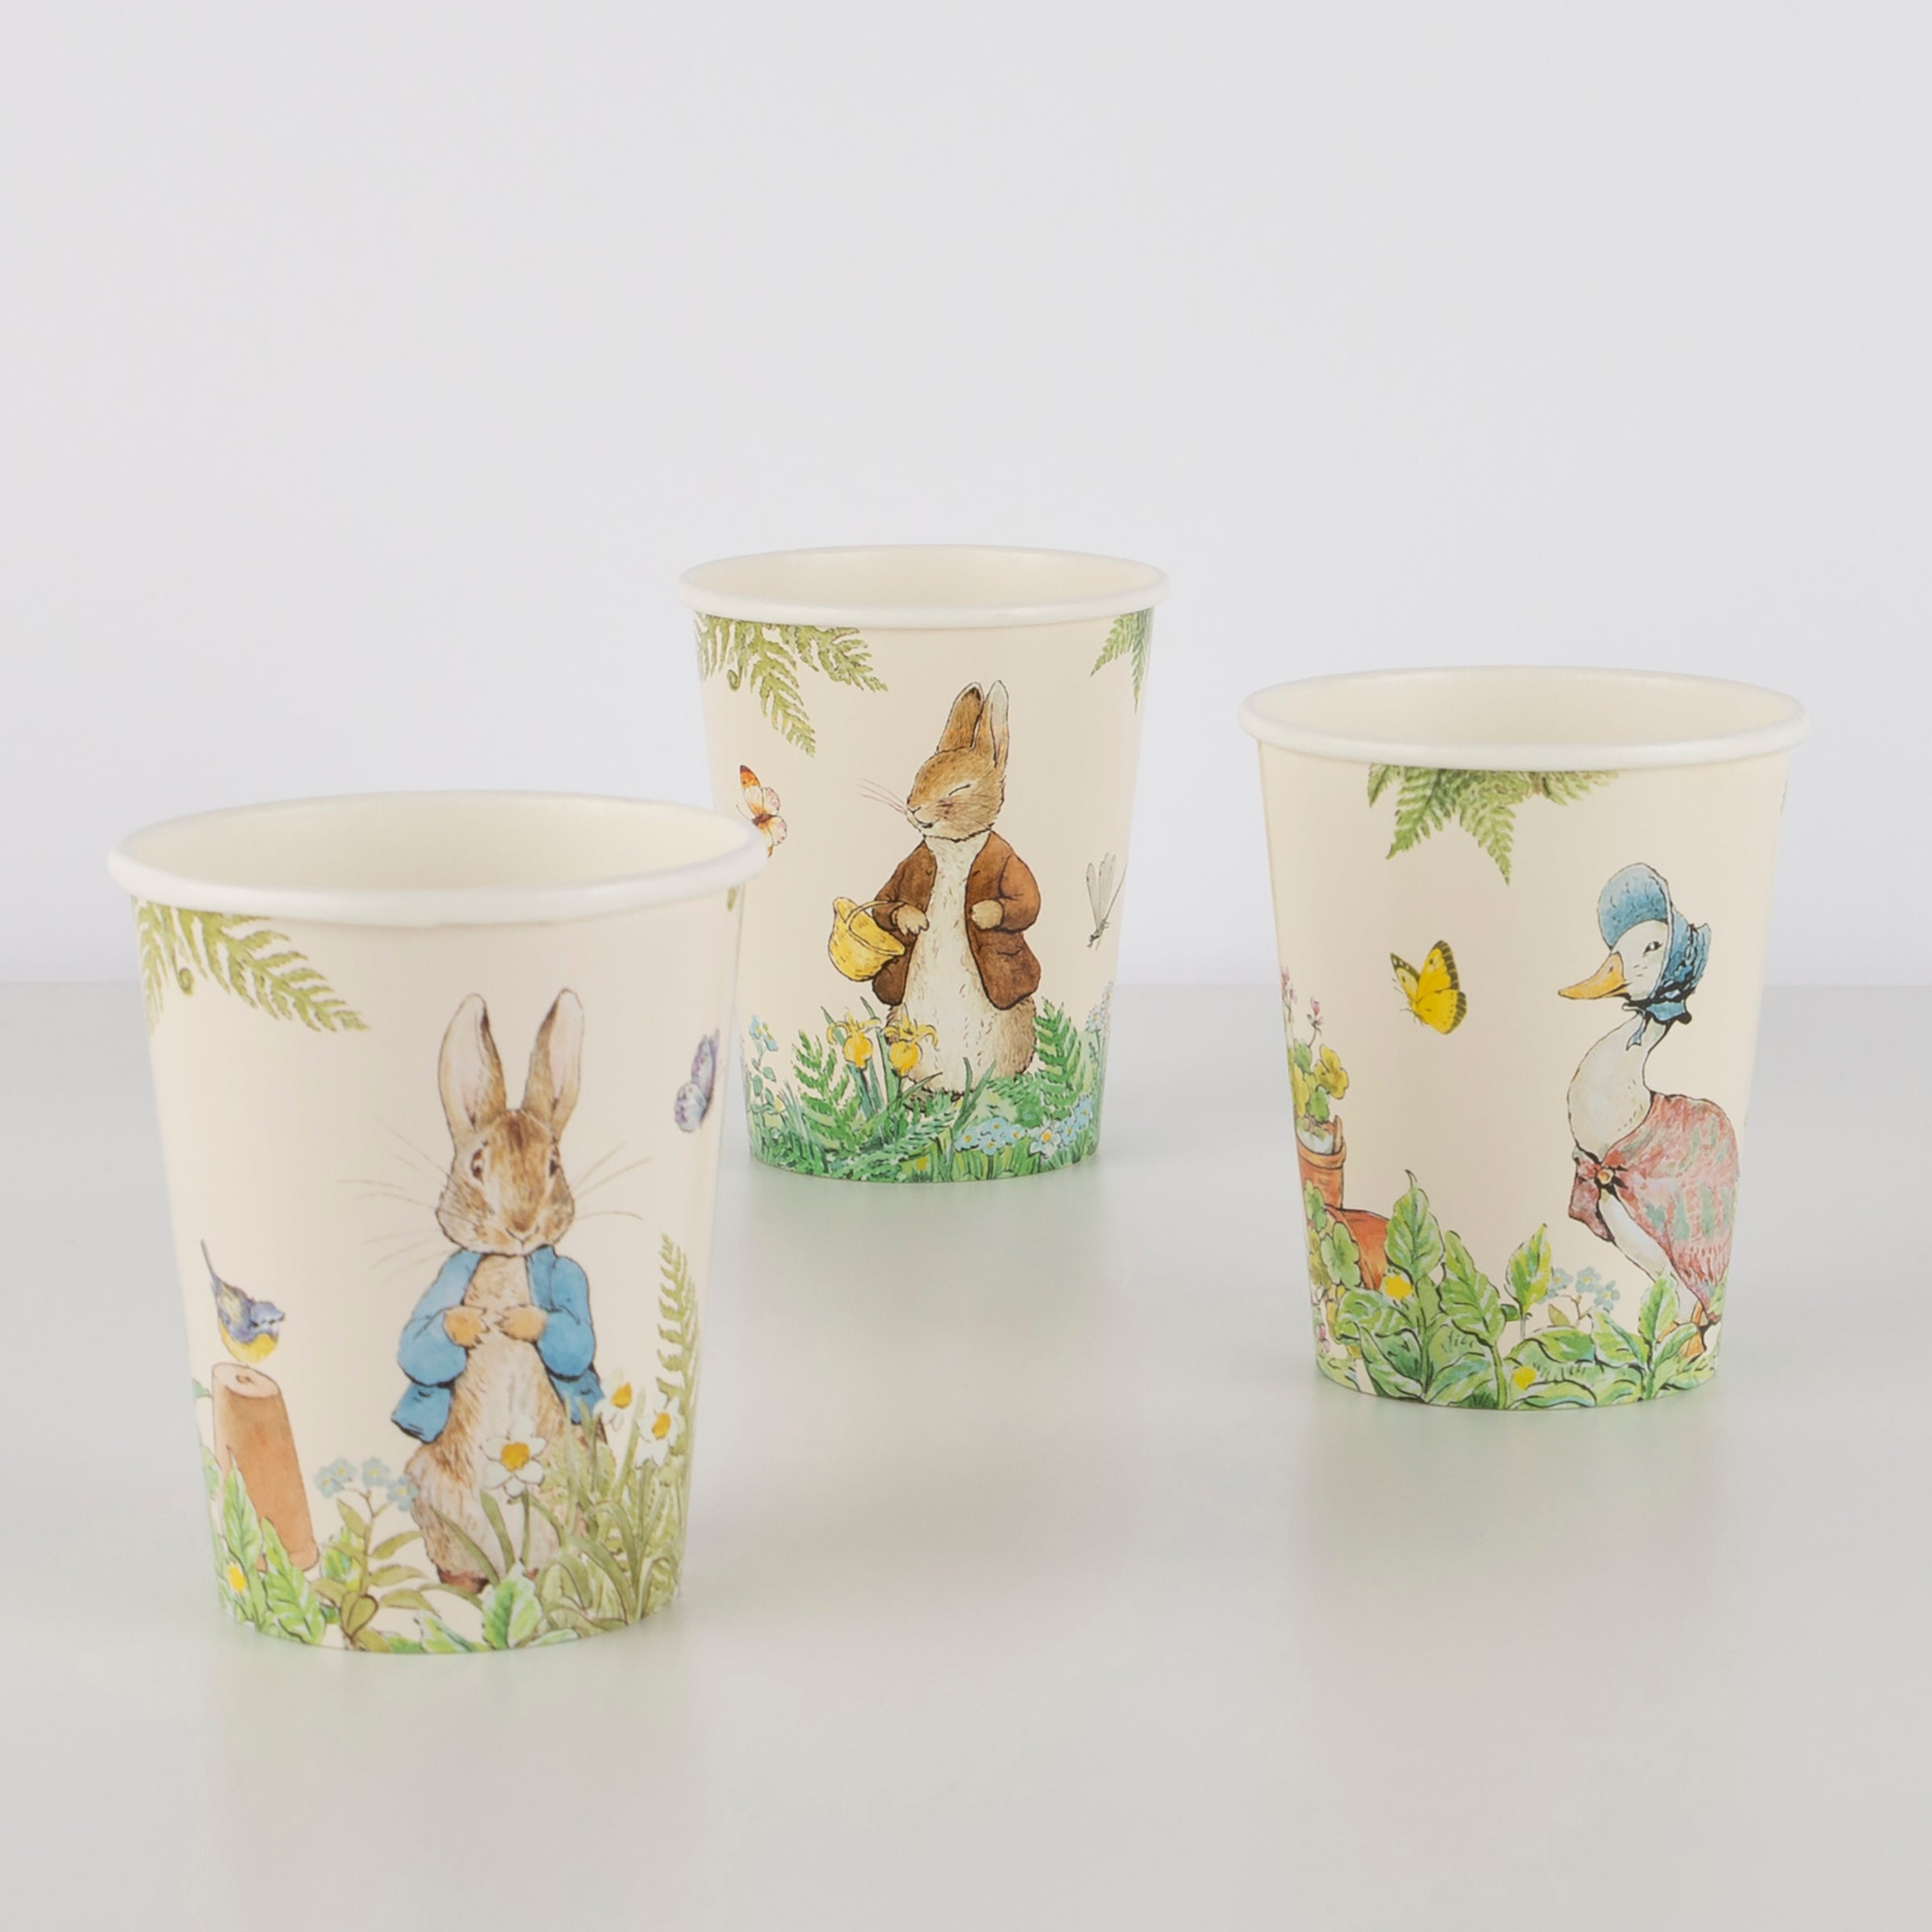 Our paper party cups are perfect for a Peter Rabbit party.